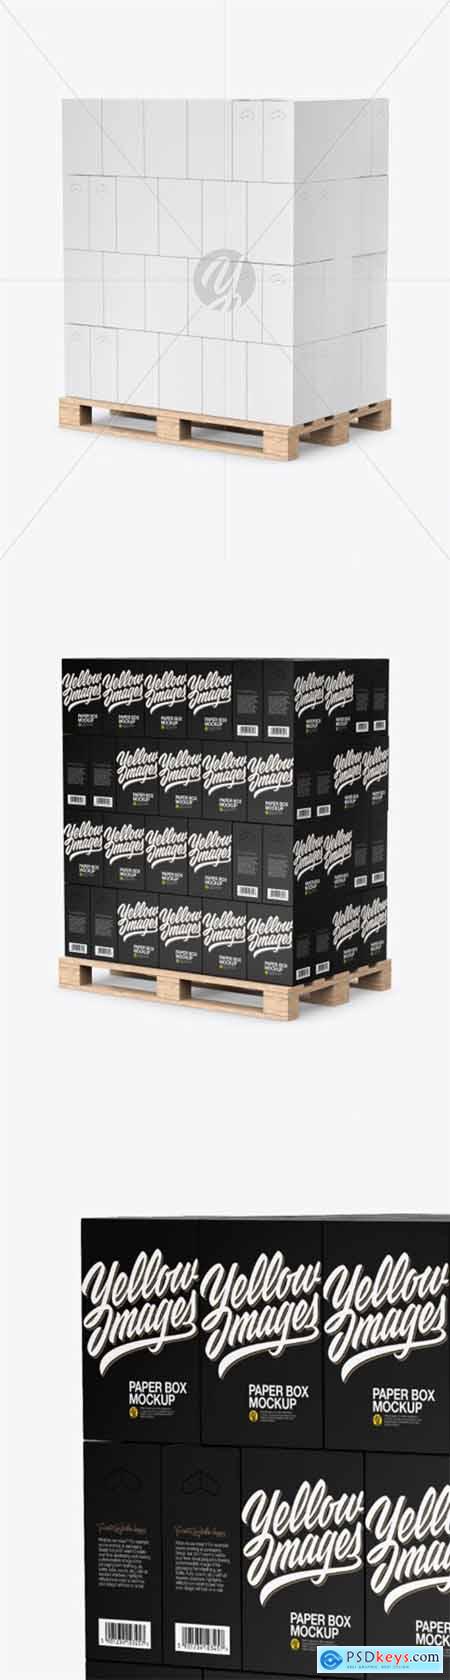 Download Wooden Pallet With Paper Boxes Mockup 51652 » Free Download Photoshop Vector Stock image Via ...